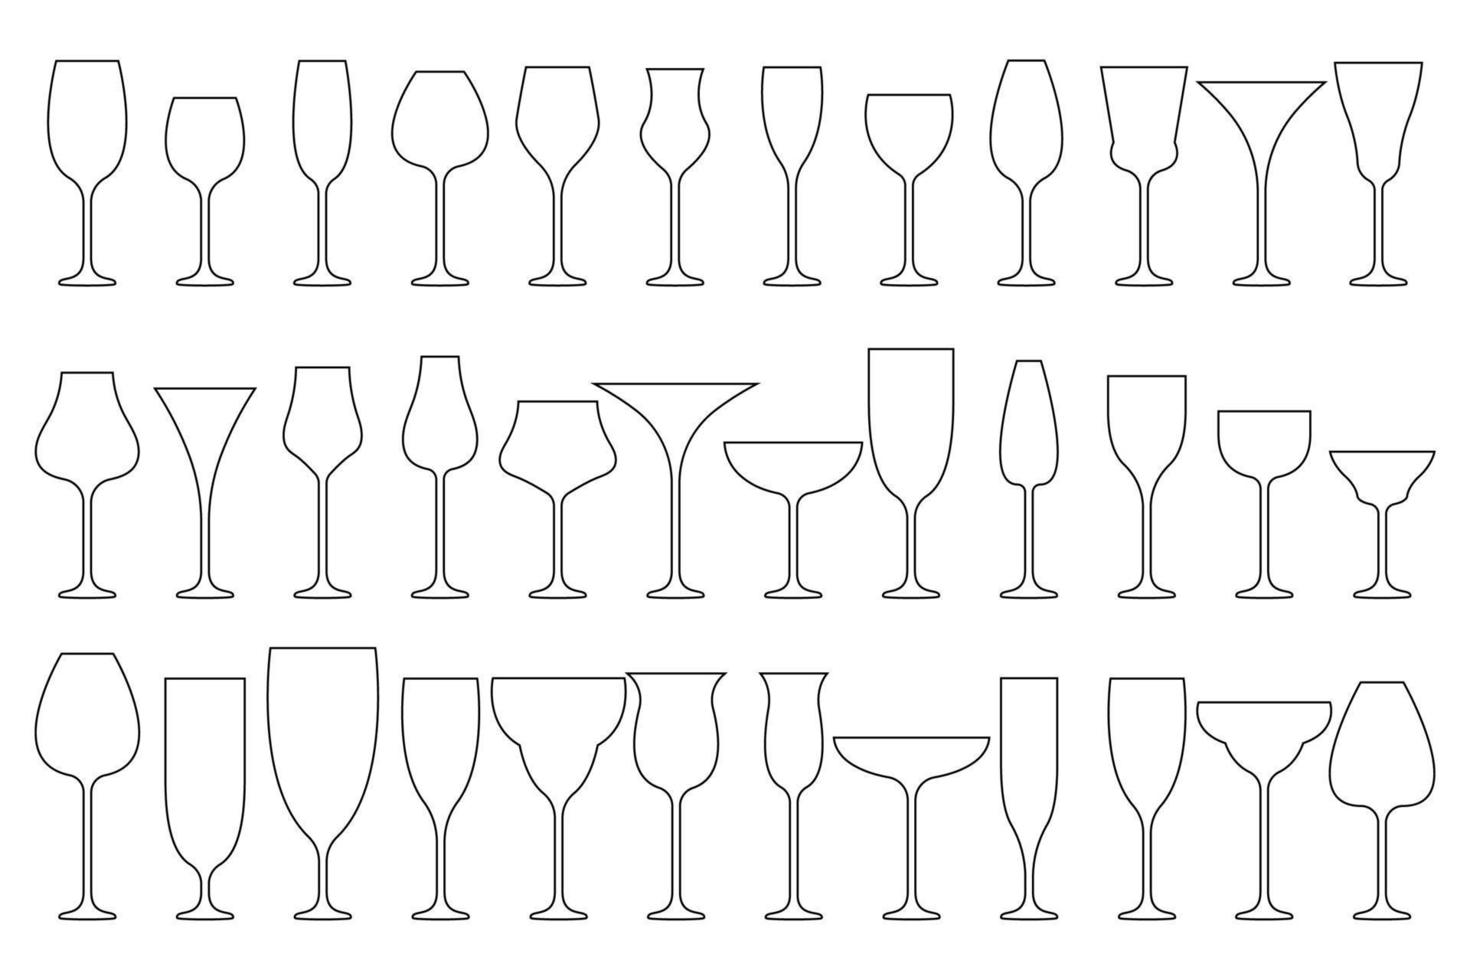 Drink glass vector design illustration isolated on white background